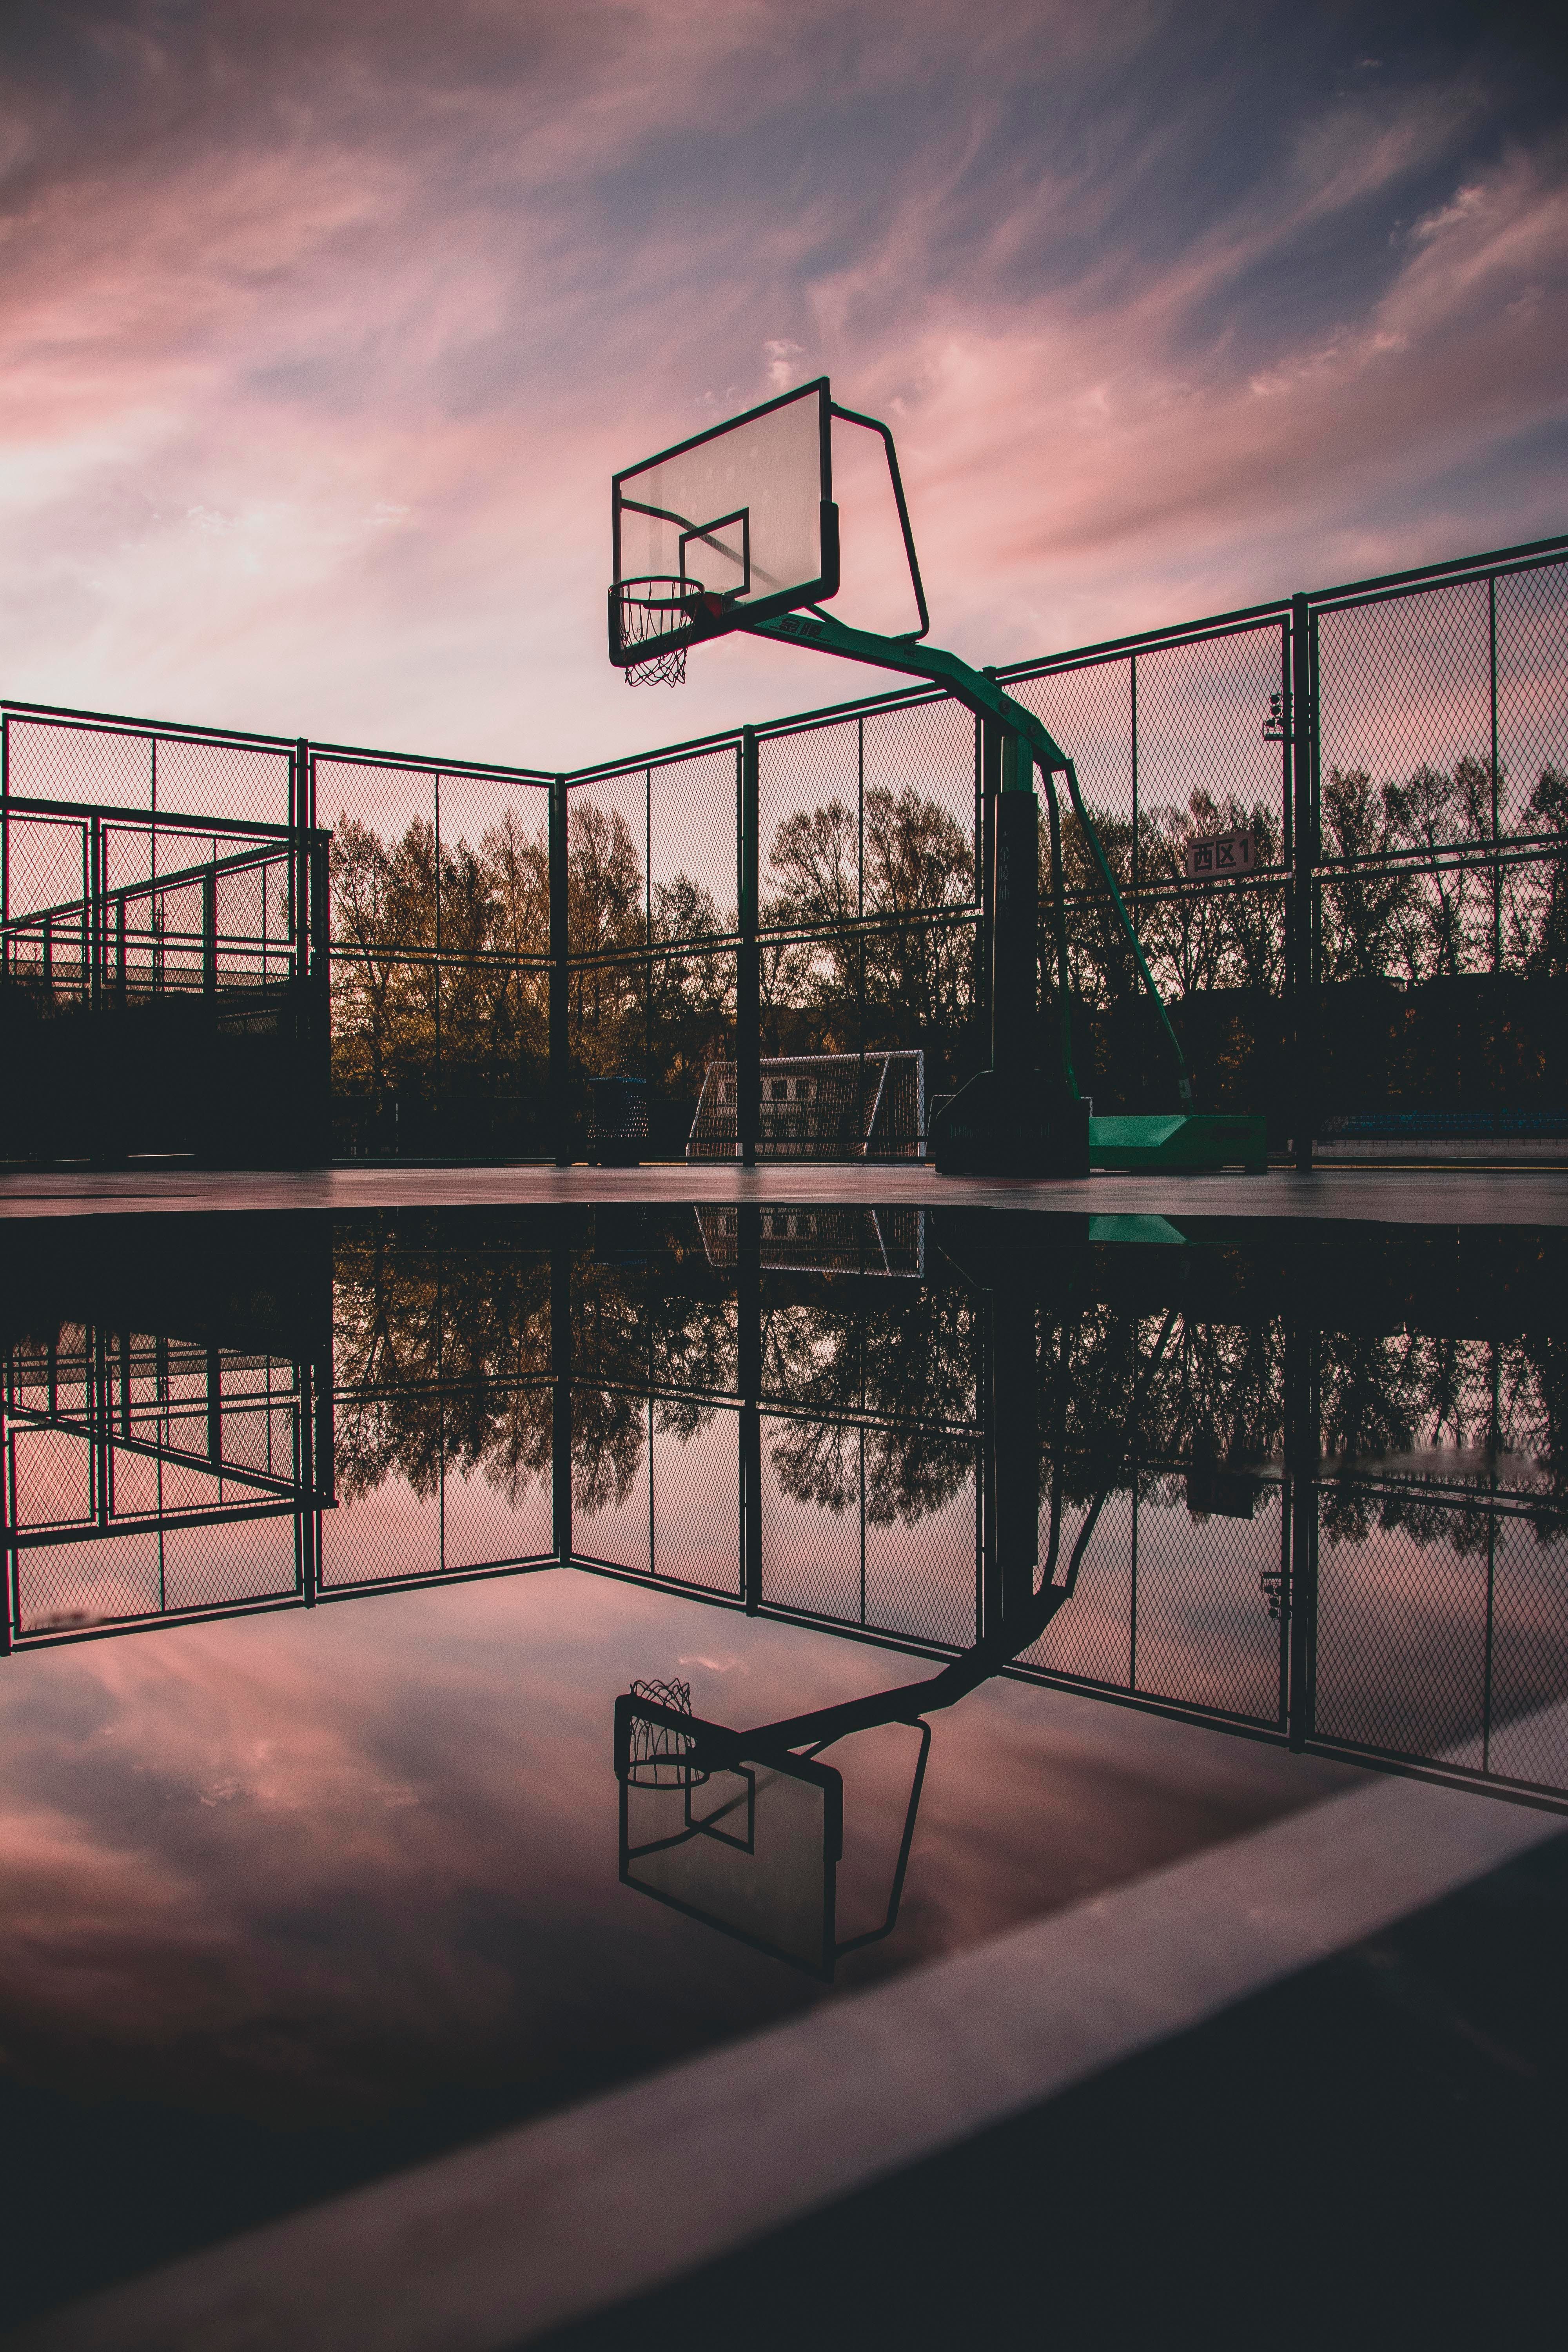 A basketball hoop is reflected in the water - Basketball